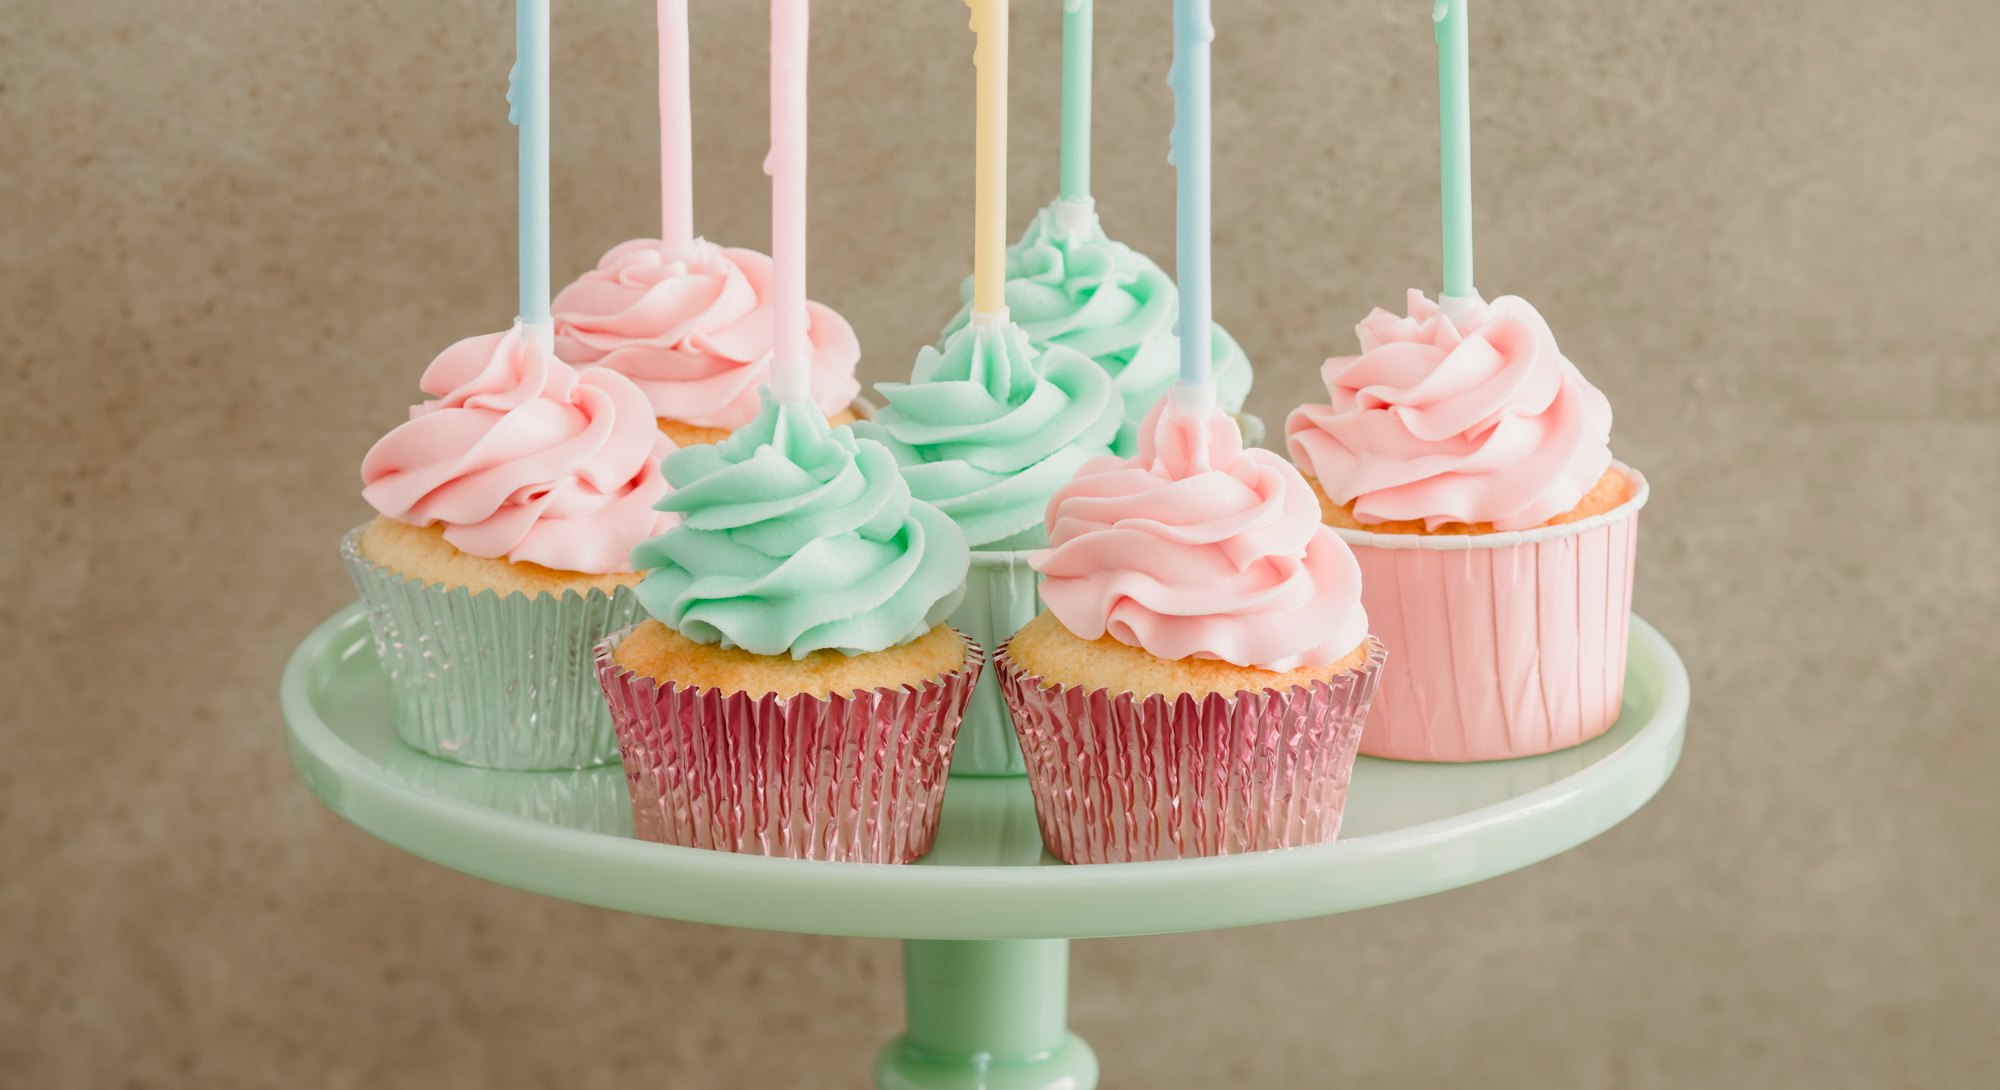 colorful birthday cupcakes on a green milk glass cake stand